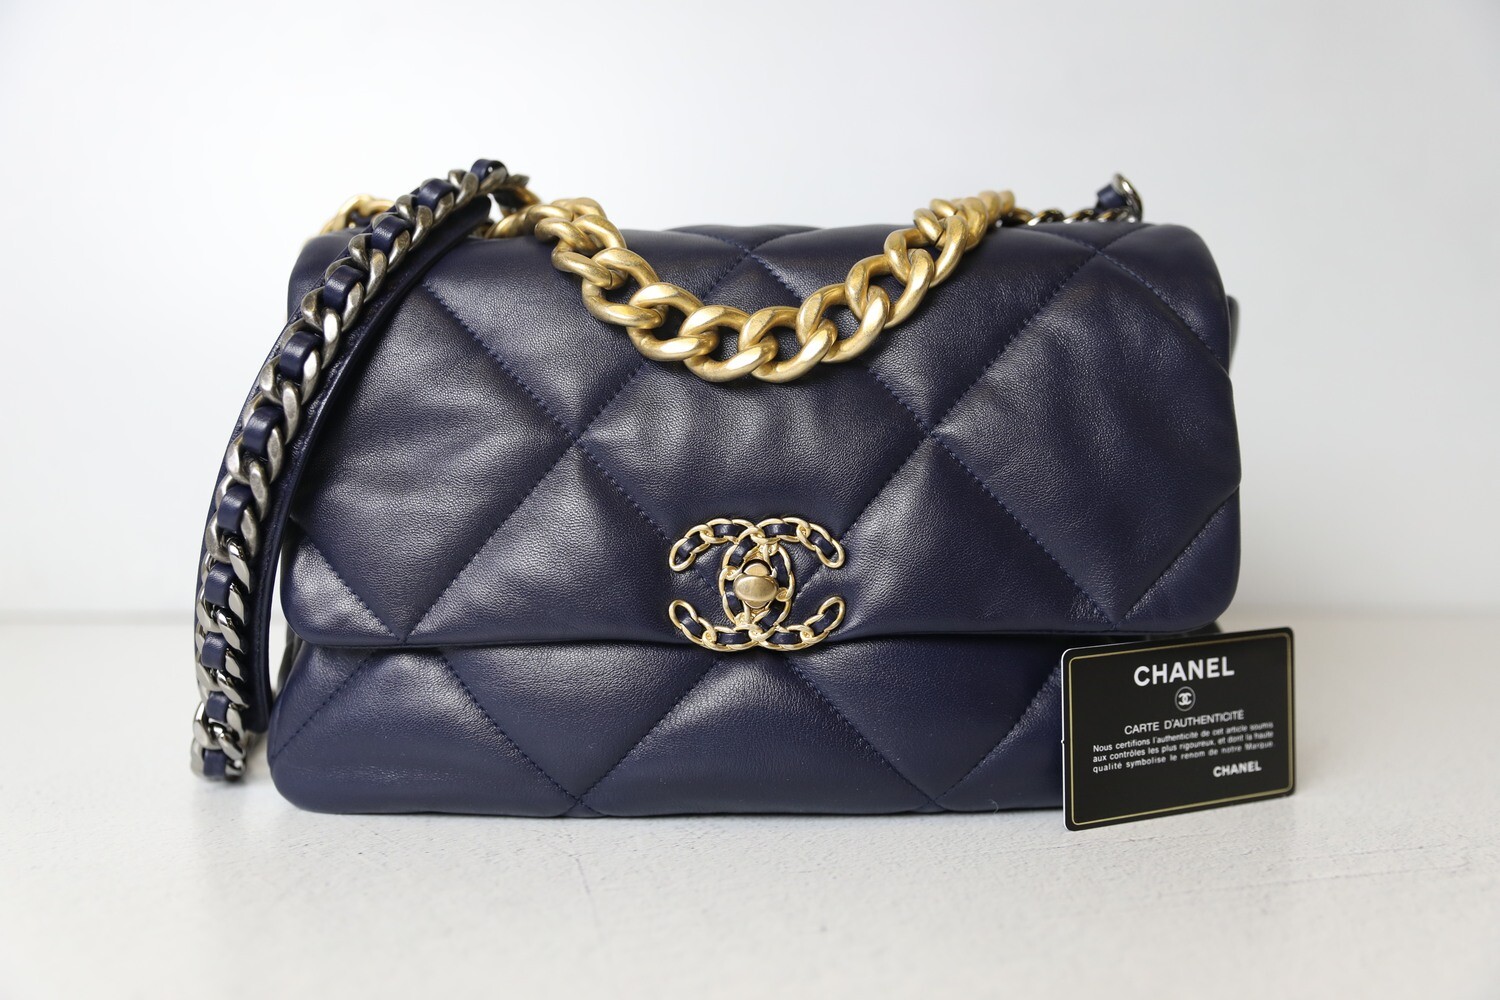 Chanel - Authenticated Chanel 19 Handbag - Leather Navy Plain for Women, Very Good Condition